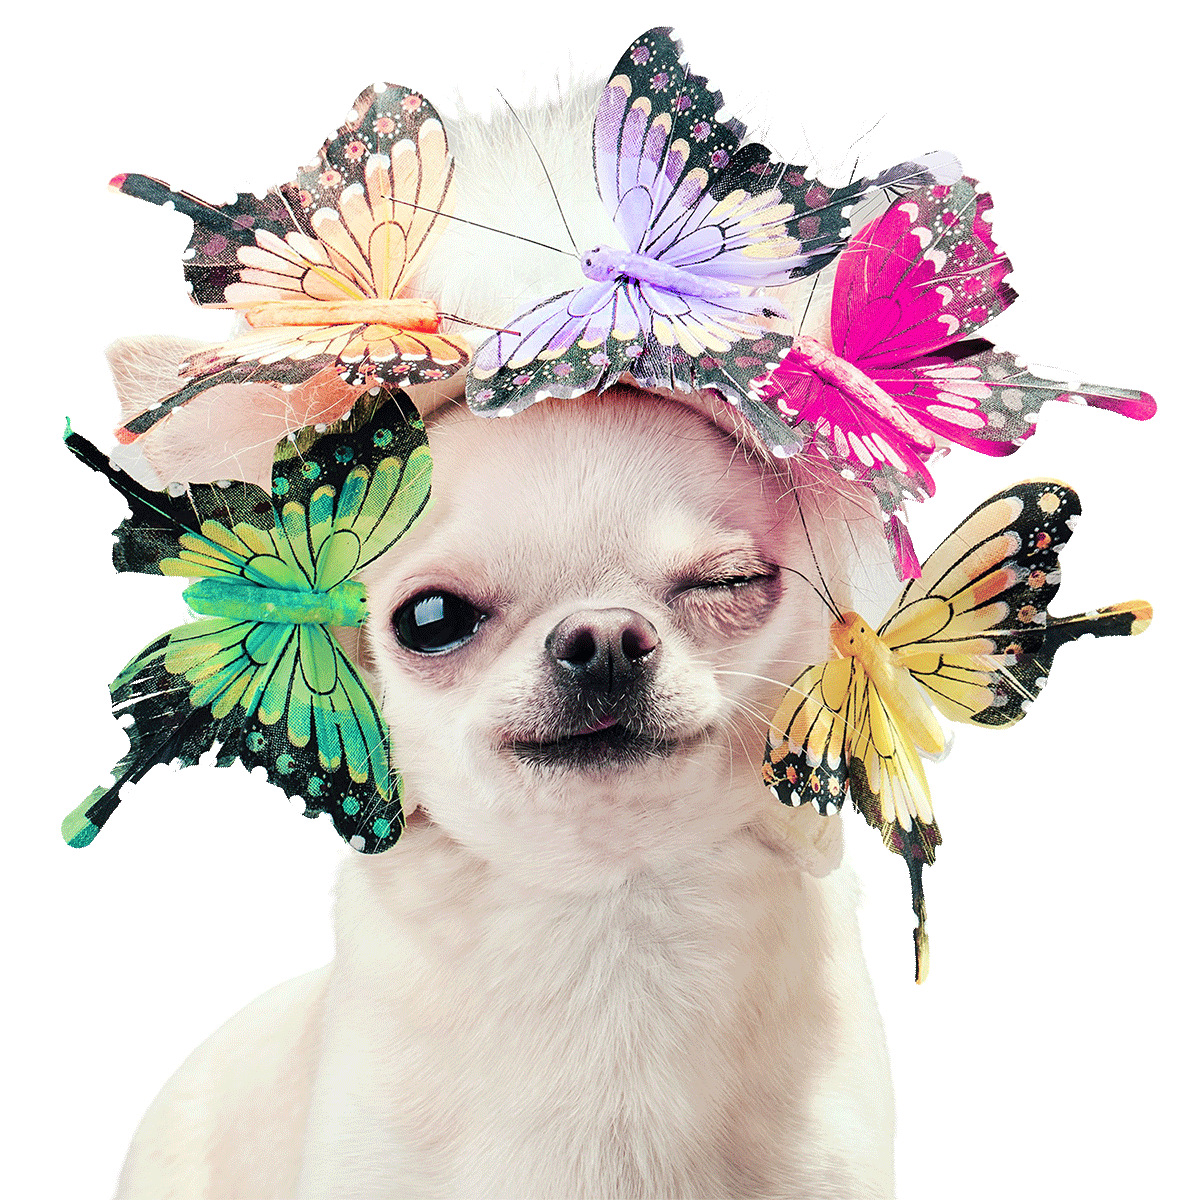 Photo of an adorable chihuaha, head festooned with colorful butterflies, winking at the camera